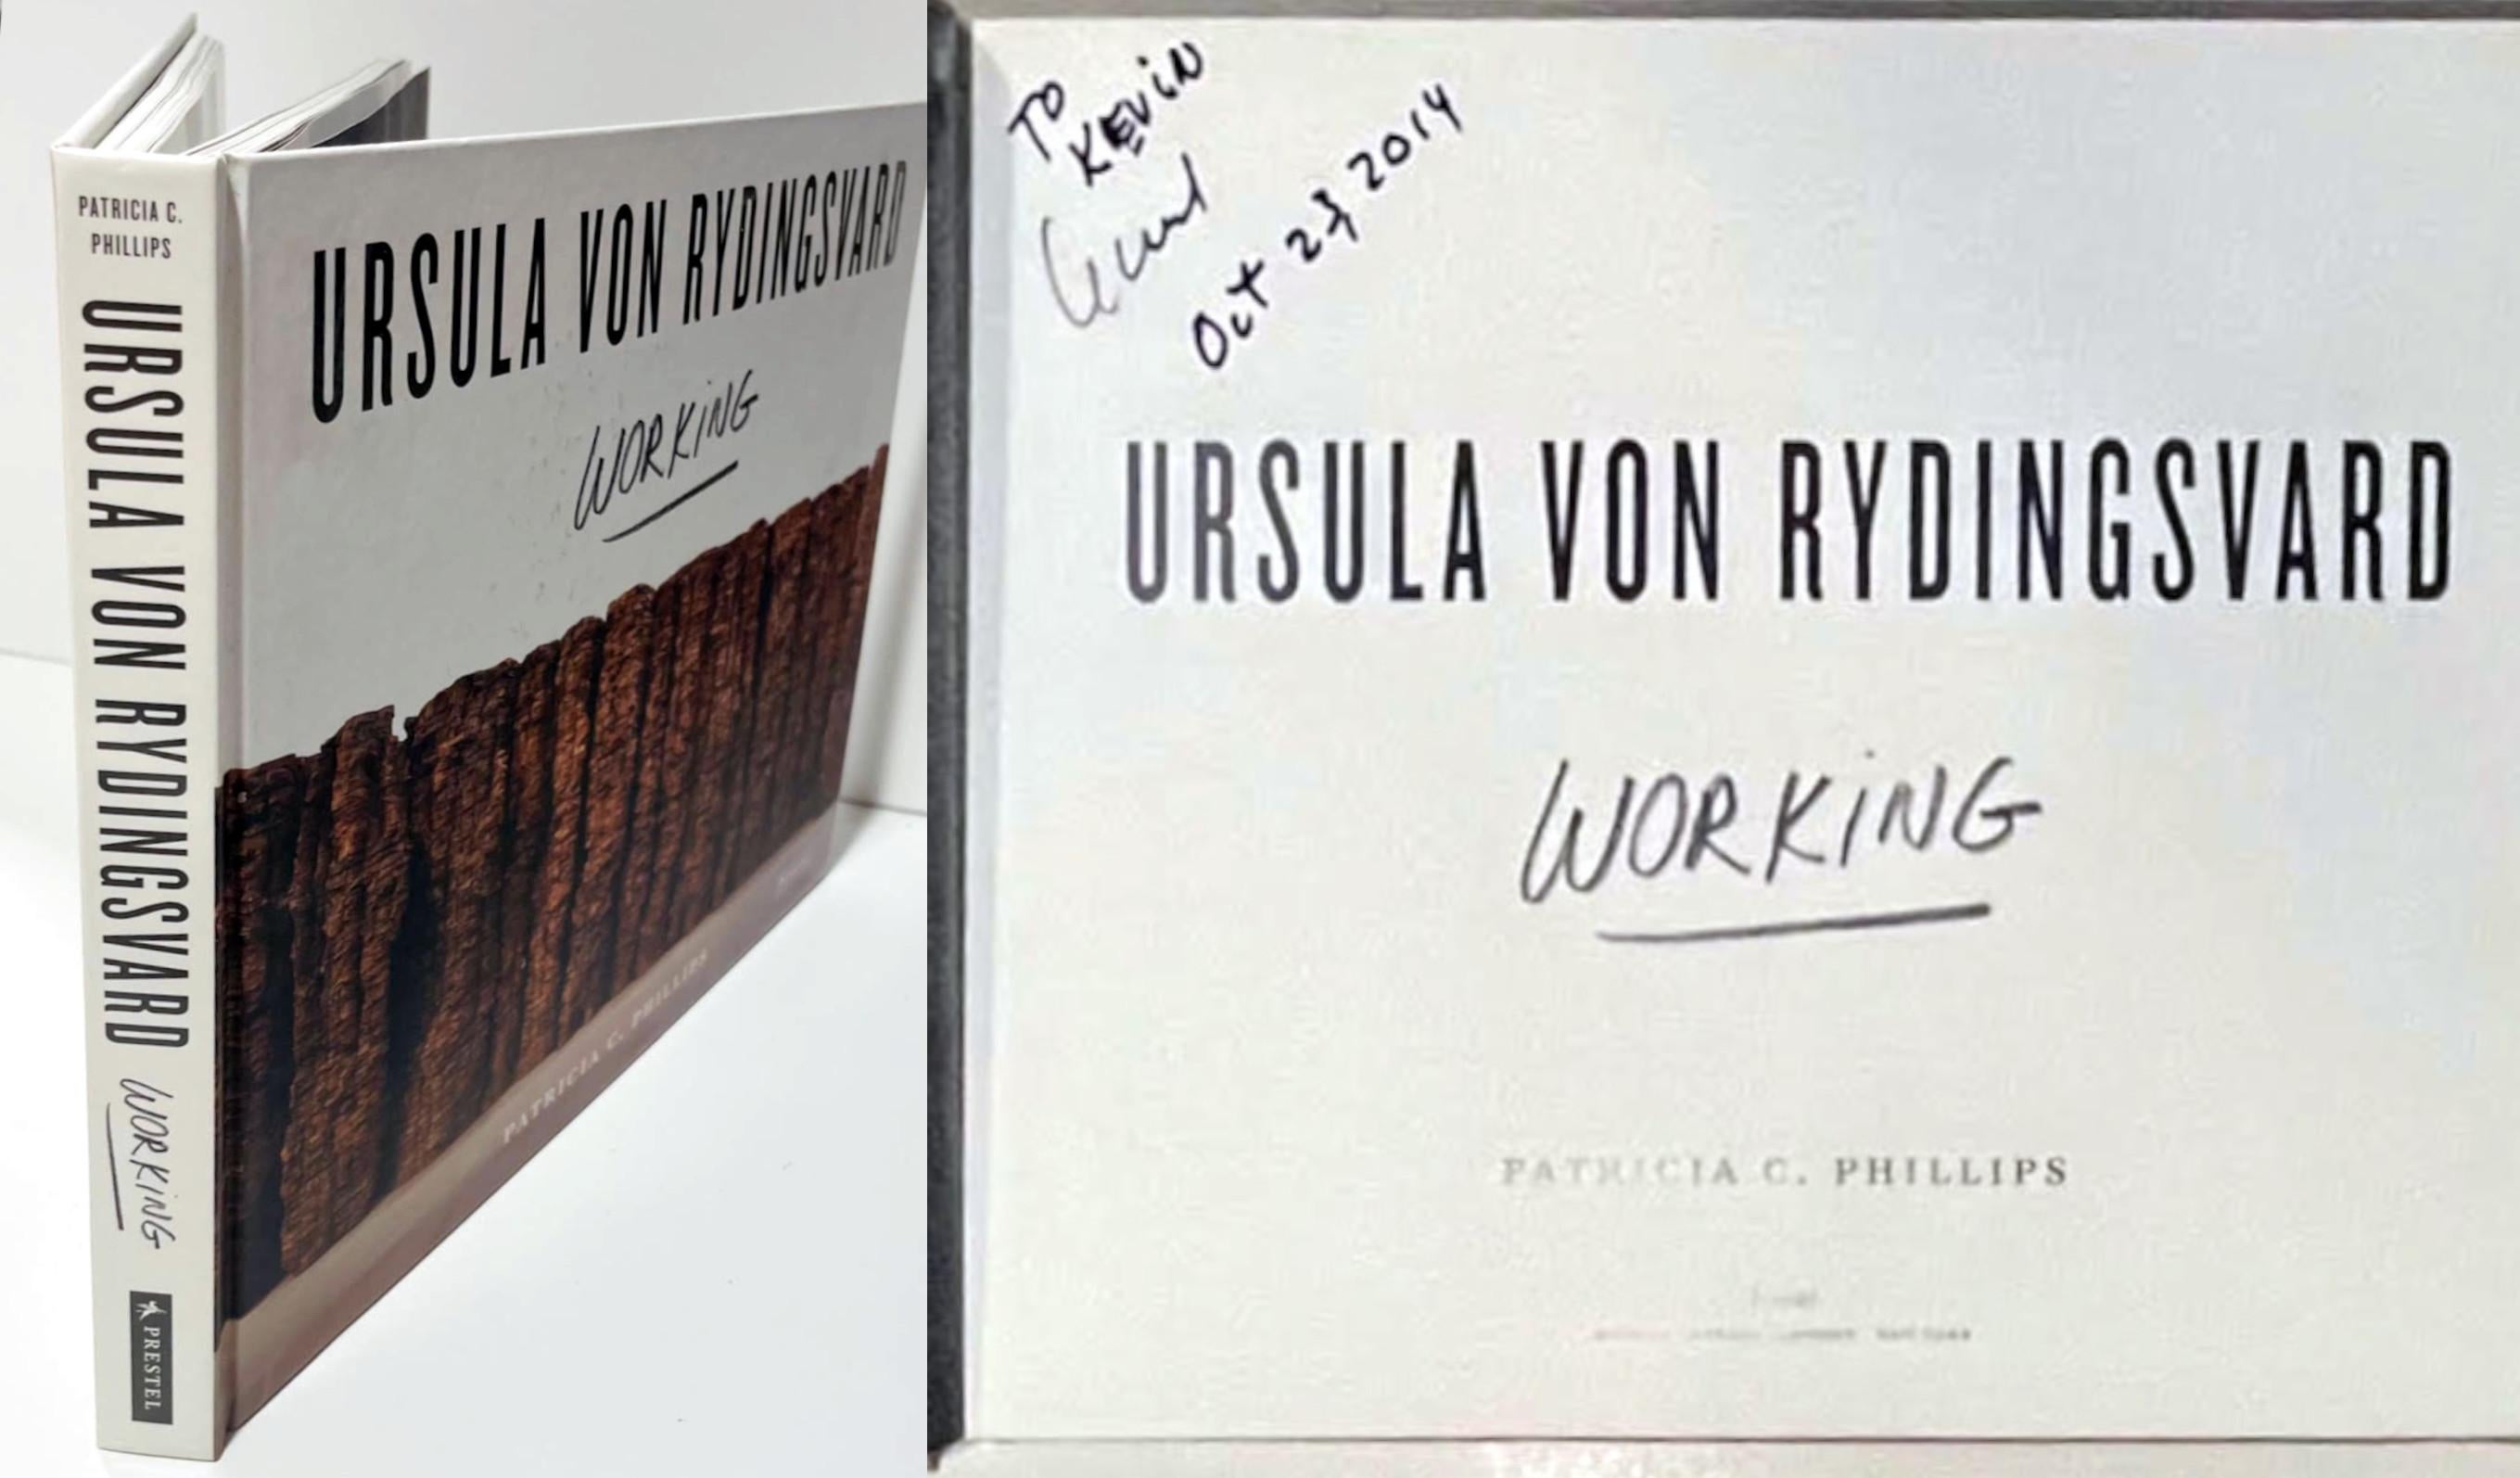 Ursula Von Rydingsvard
Working (Hand signed and inscribed twice by Ursula von Rydingsvard), 2011
Hardback monograph with no dust jacket as issued (Hand signed and inscribed twice by Ursula von Rydingsvard in both 2013 and 2014)
Hand signed and